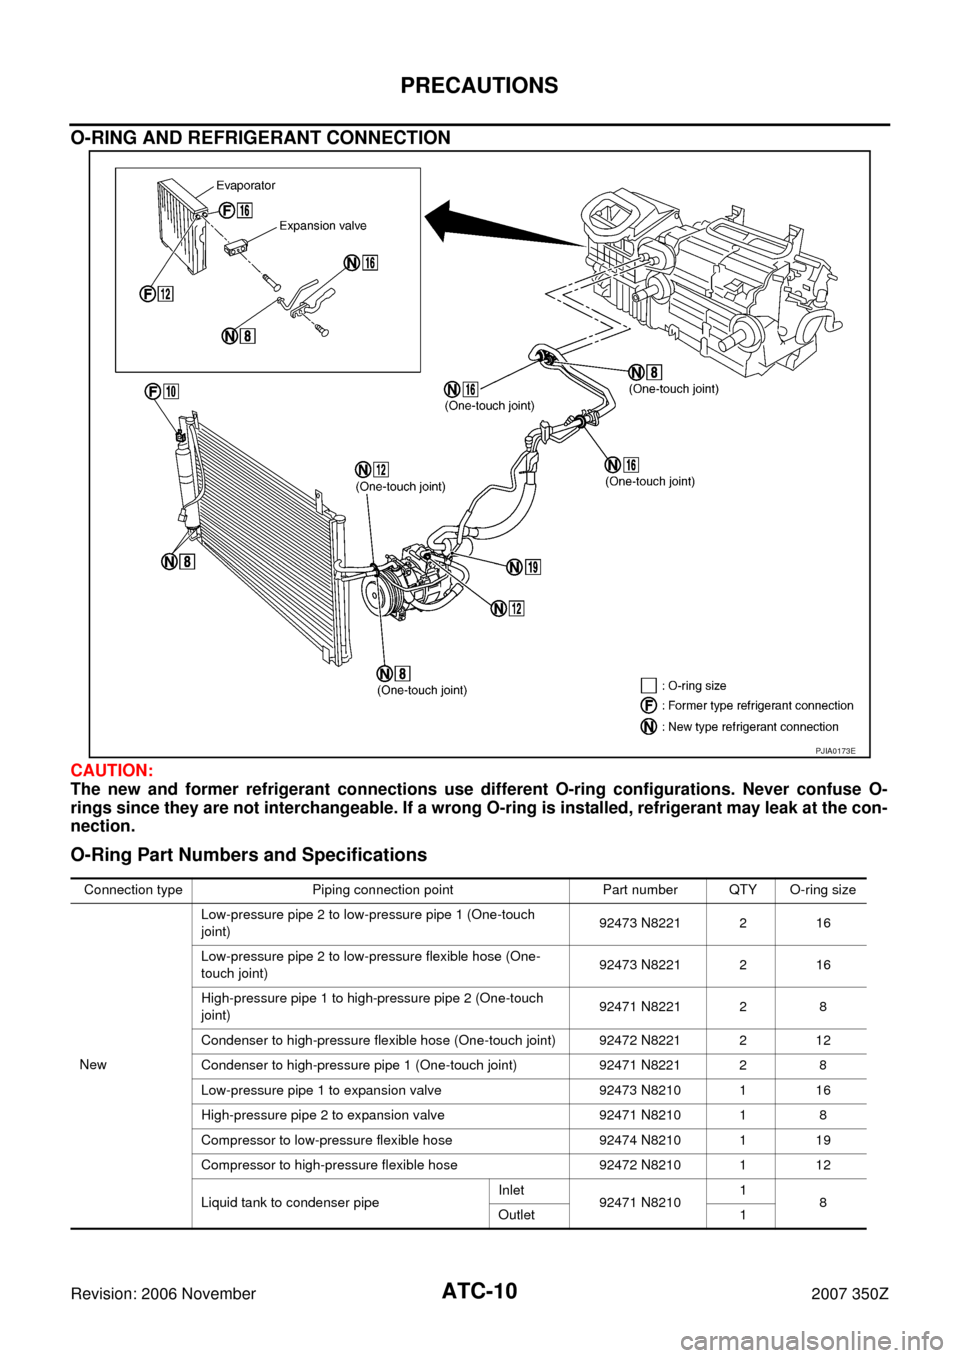 NISSAN 350Z 2007 Z33 Automatic Air Conditioner Workshop Manual ATC-10
PRECAUTIONS
Revision: 2006 November2007 350Z
O-RING AND REFRIGERANT CONNECTION
CAUTION:
The new and former refrigerant connections use different O-ring configurations. Never confuse O-
rings si